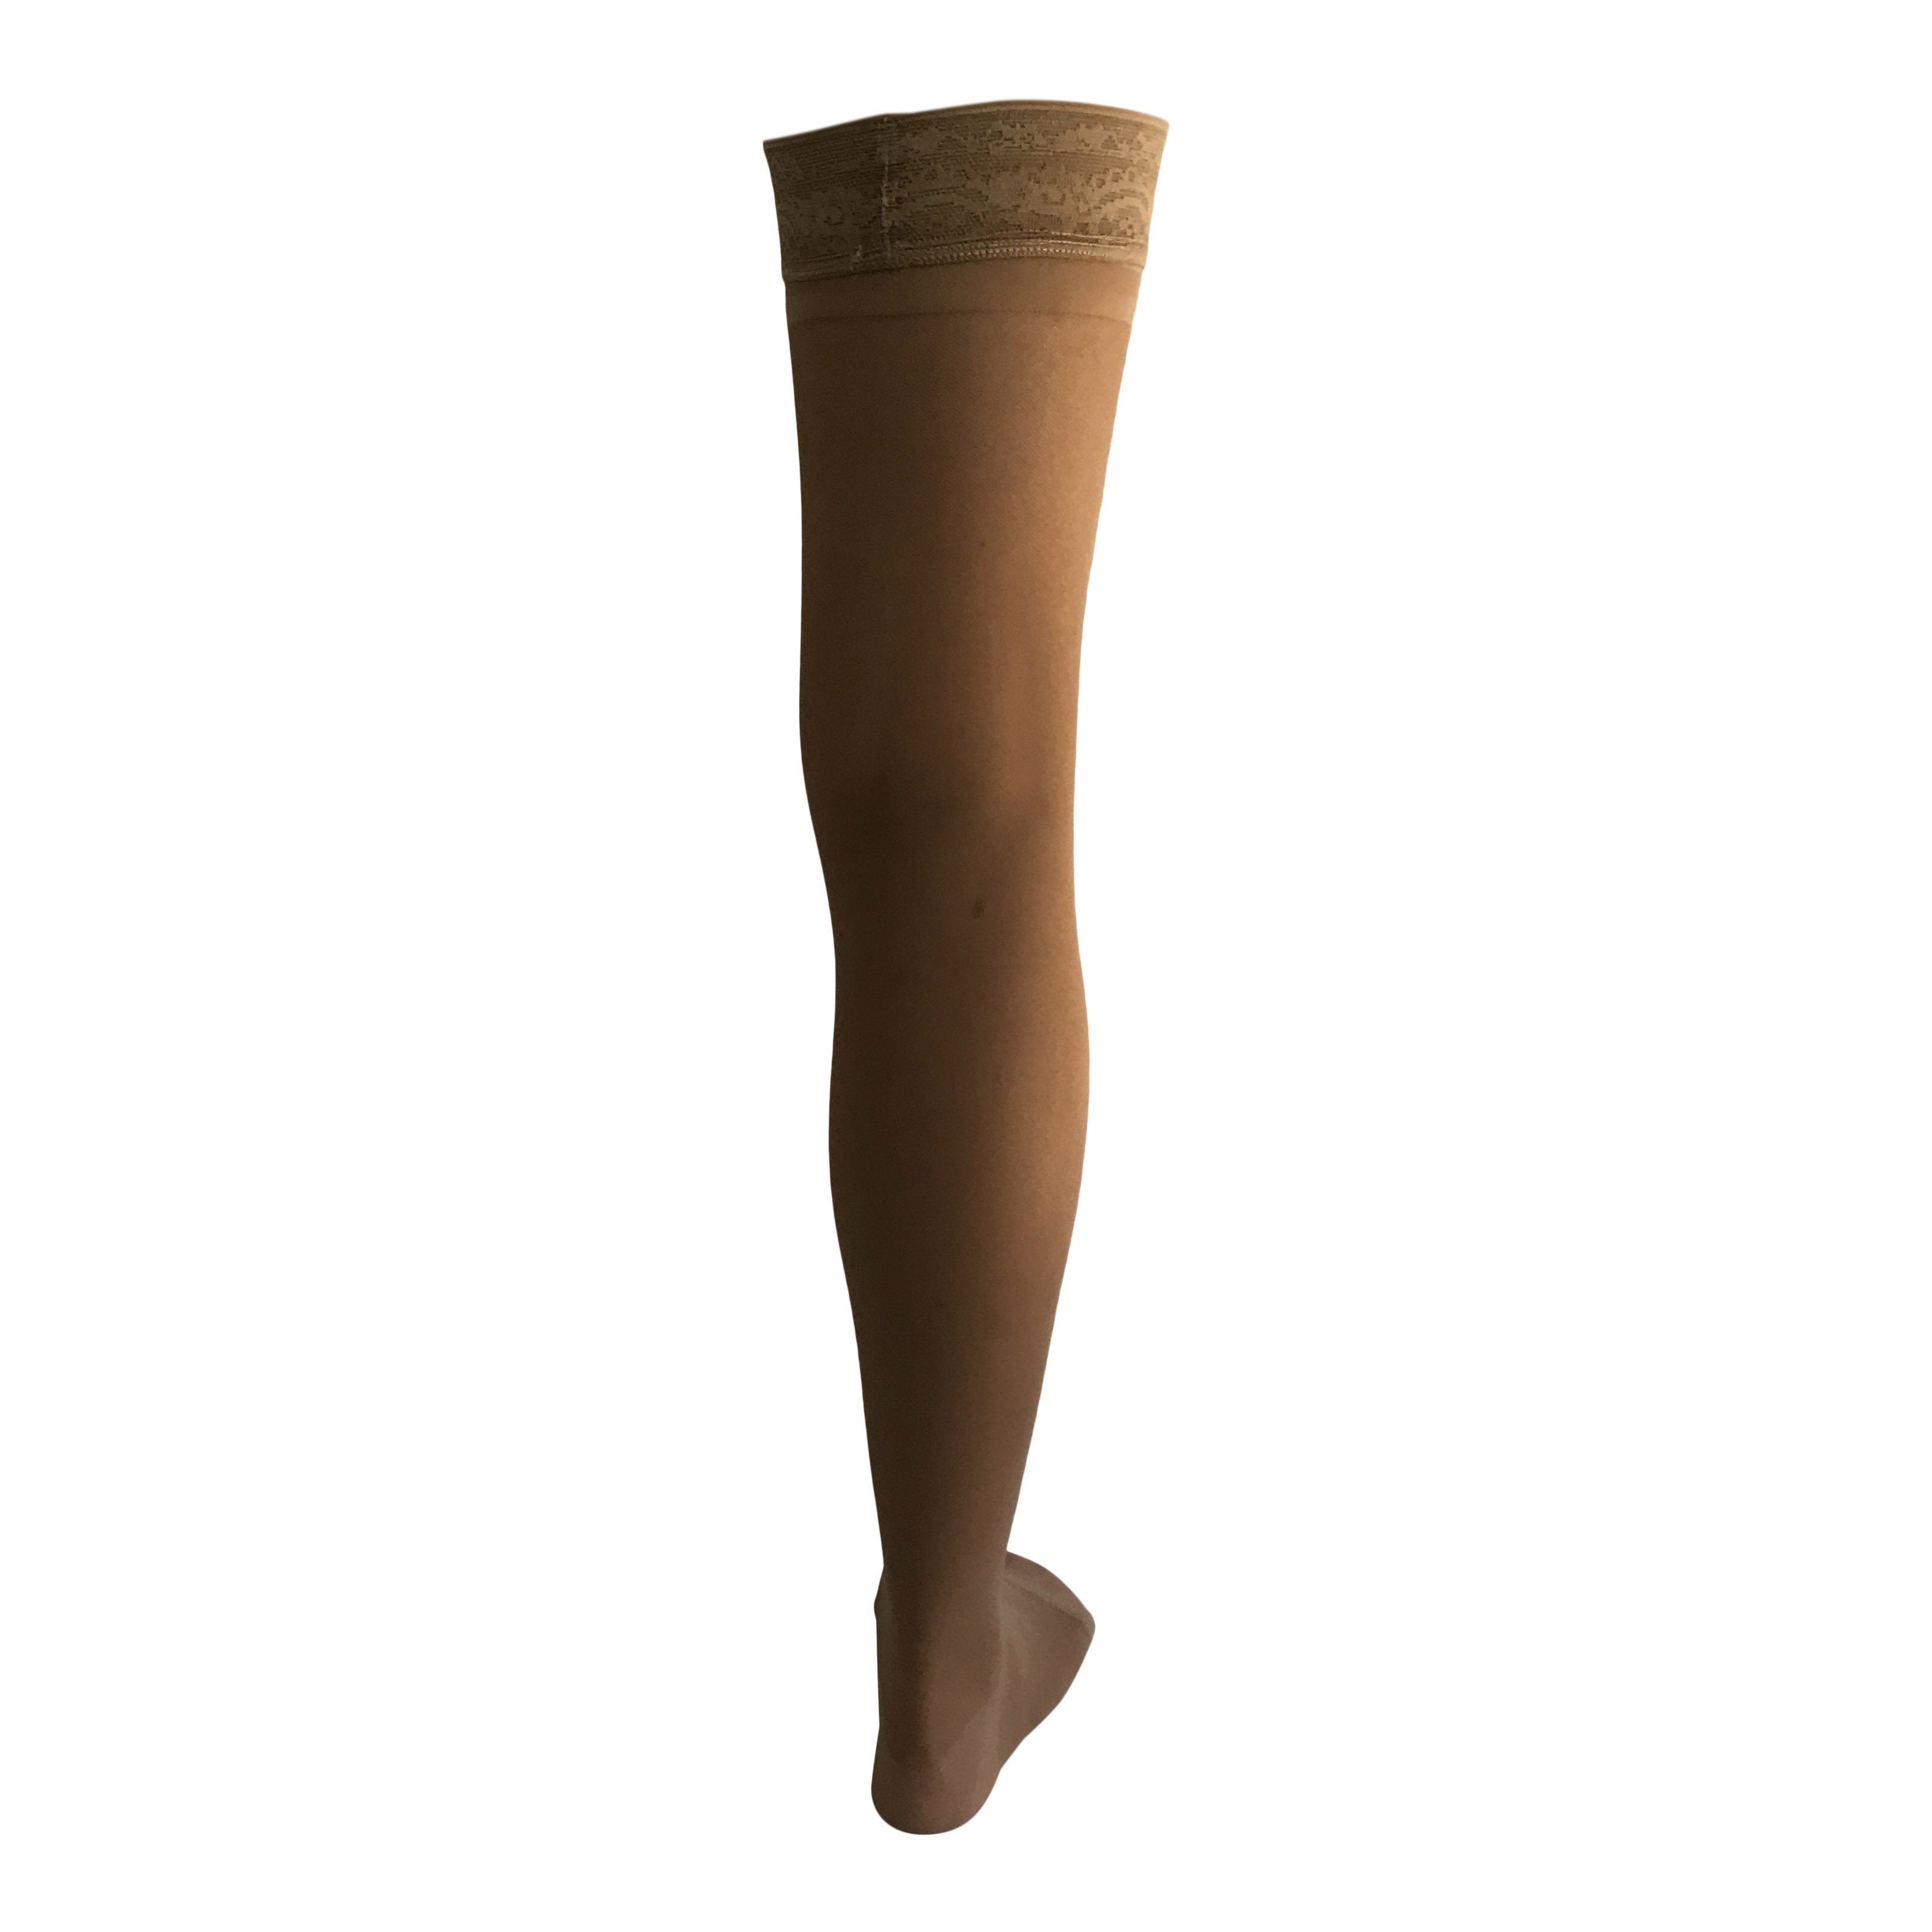 TruSheer Extra Firm Compression Thigh High Stockings, 30-40mm Hg